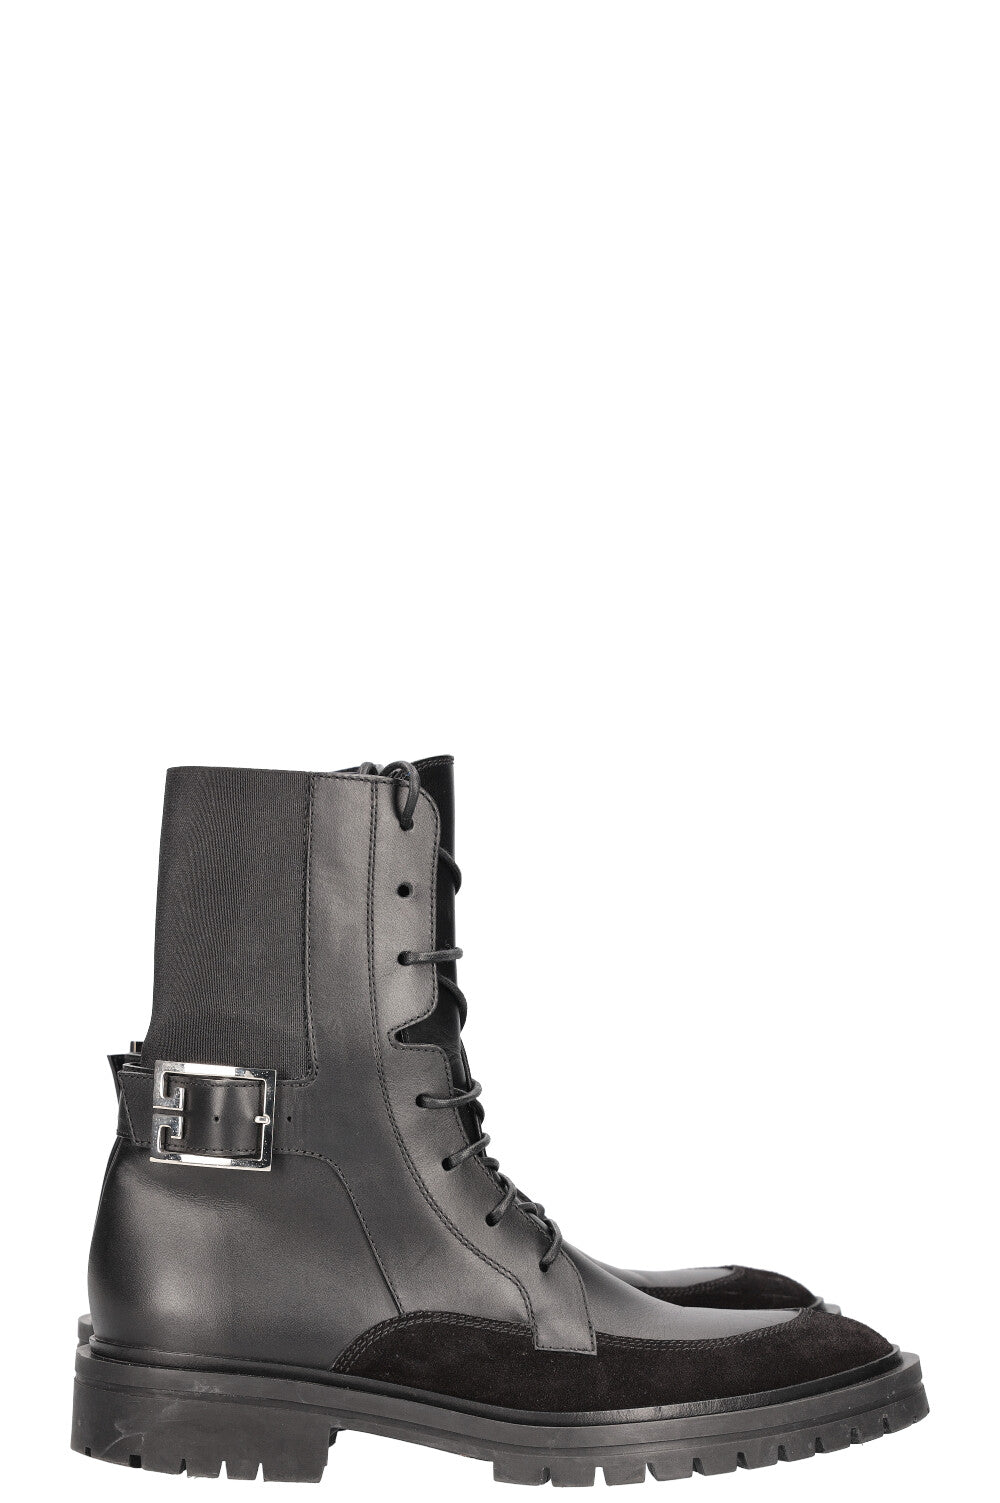 GIVENCHY Aviator Lace Up Boots Black